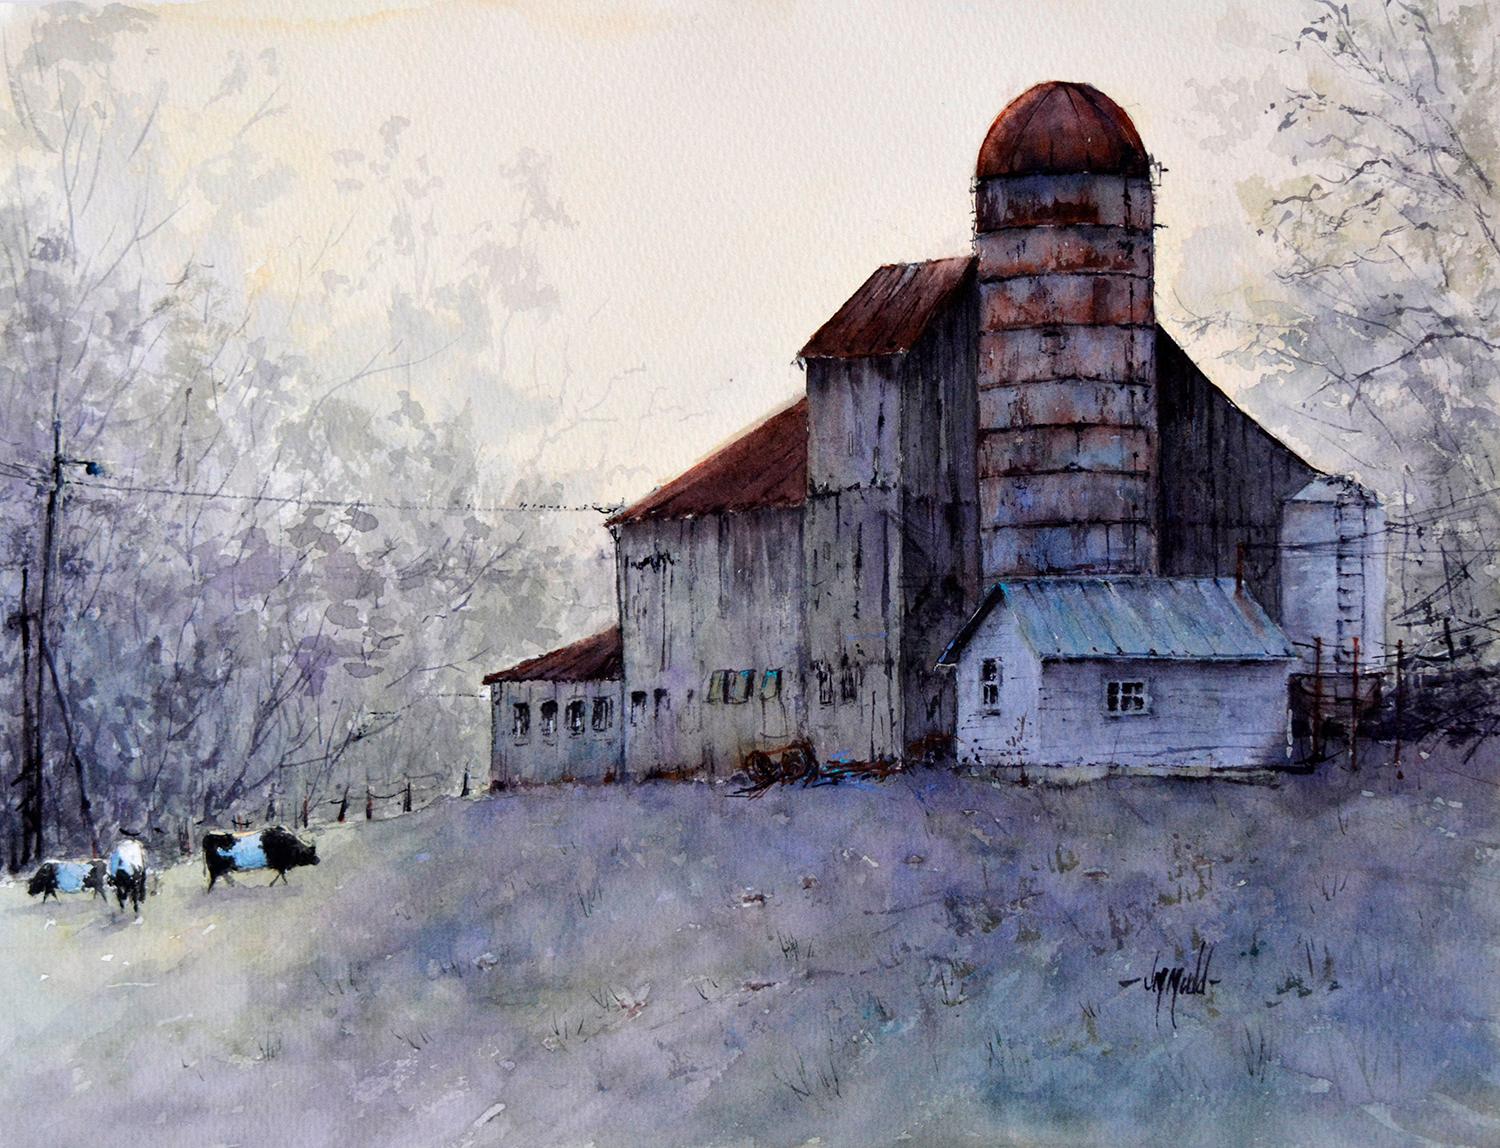 A View from the Back, Original Painting